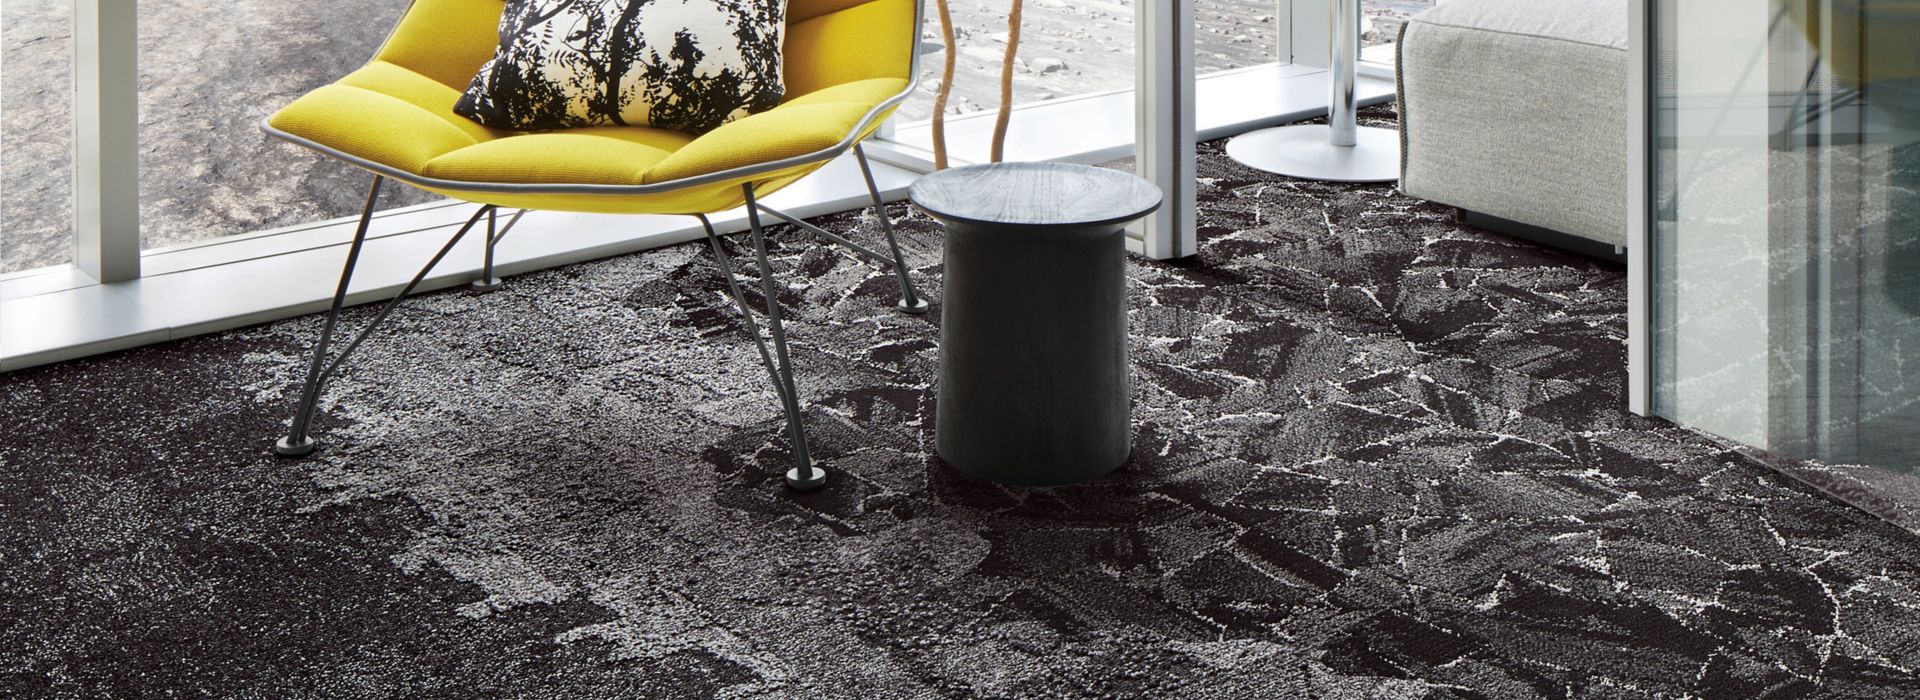 Interface Bridge Creek, Flat Rock, Mountain Rock and Mile Rock carpet tiles in seating area with yellow chair image number 2